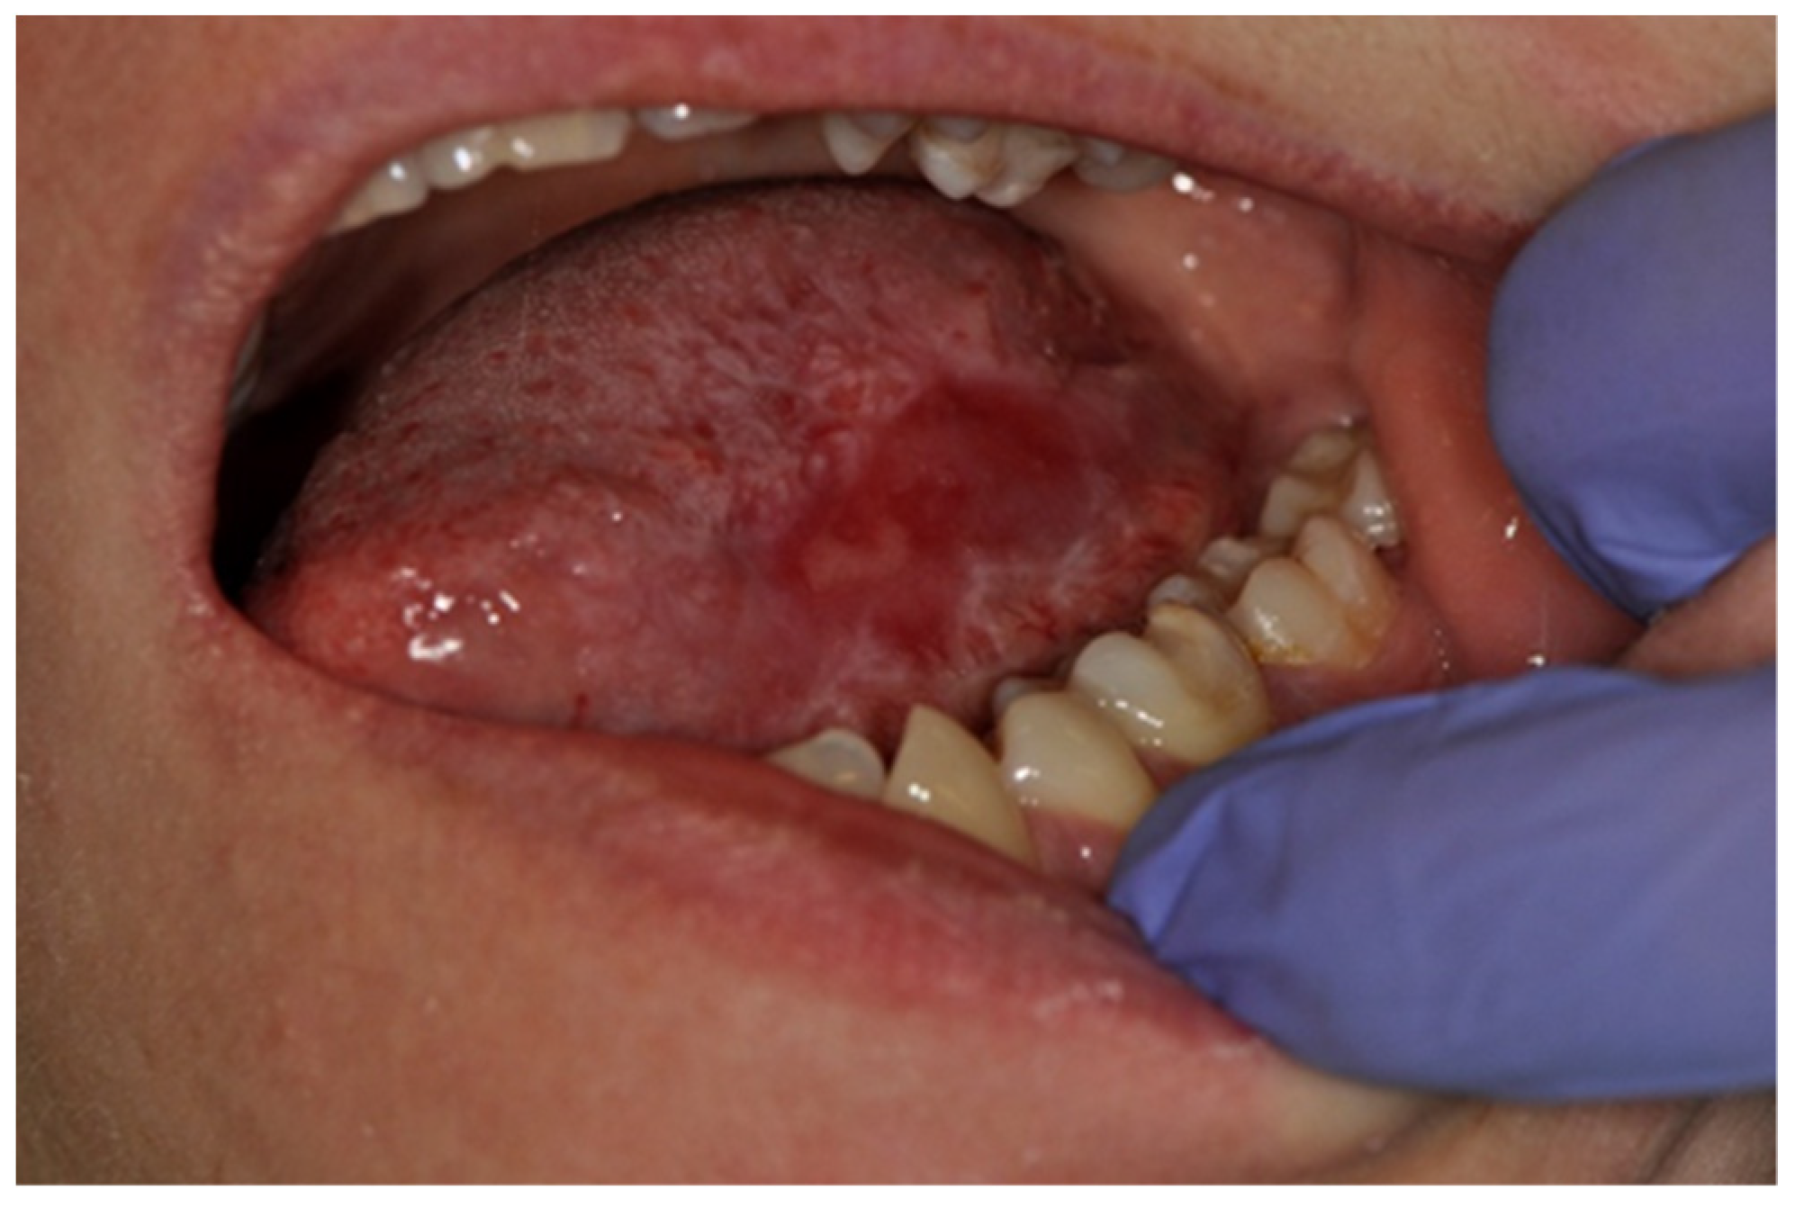 Symmetry Free Full Text Prevalence And Characteristic Of Oral Mucosa Lesions